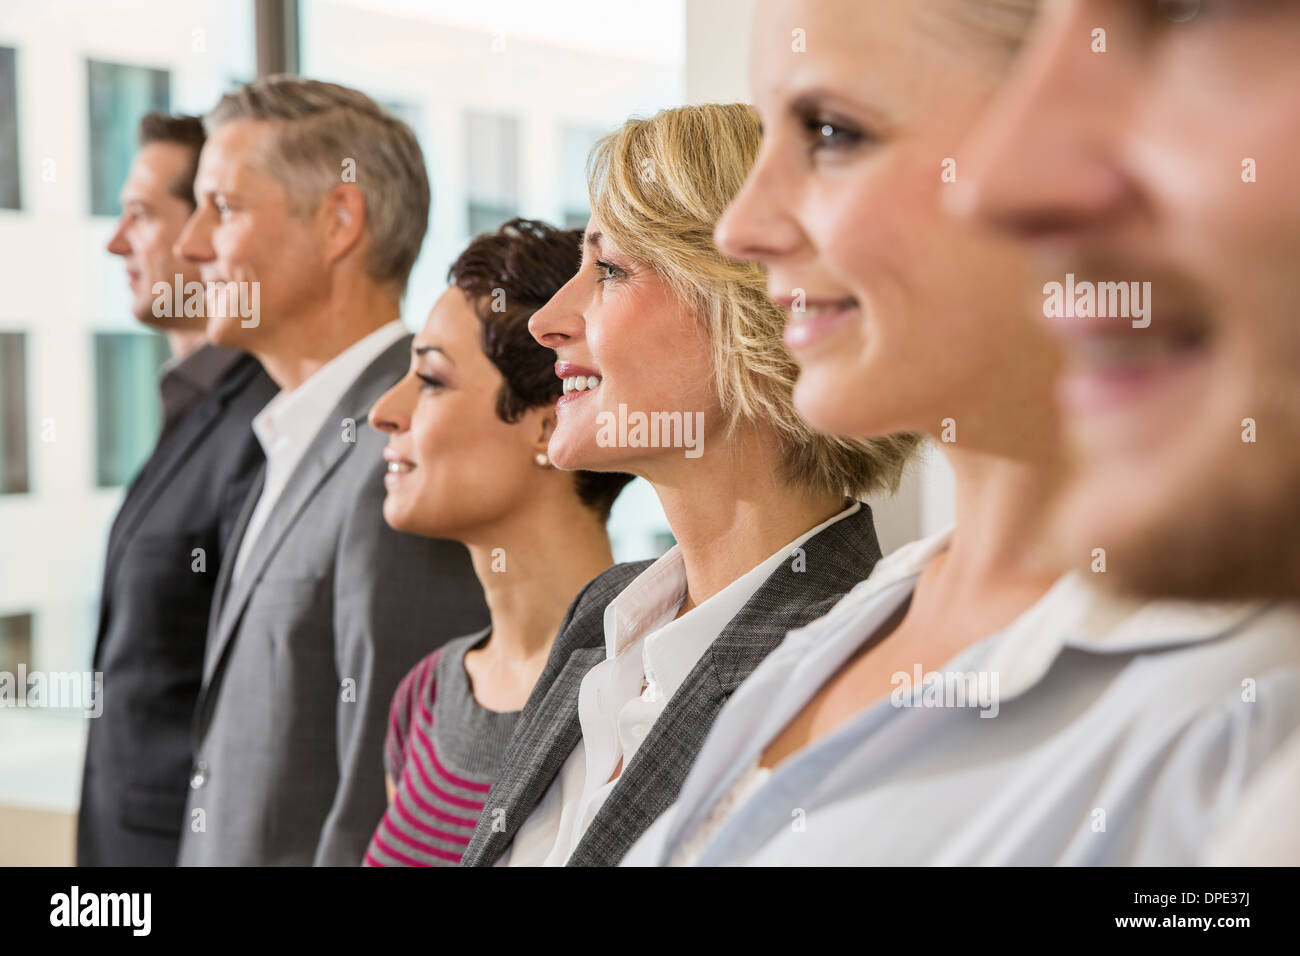 Businesspeople in a row Banque D'Images